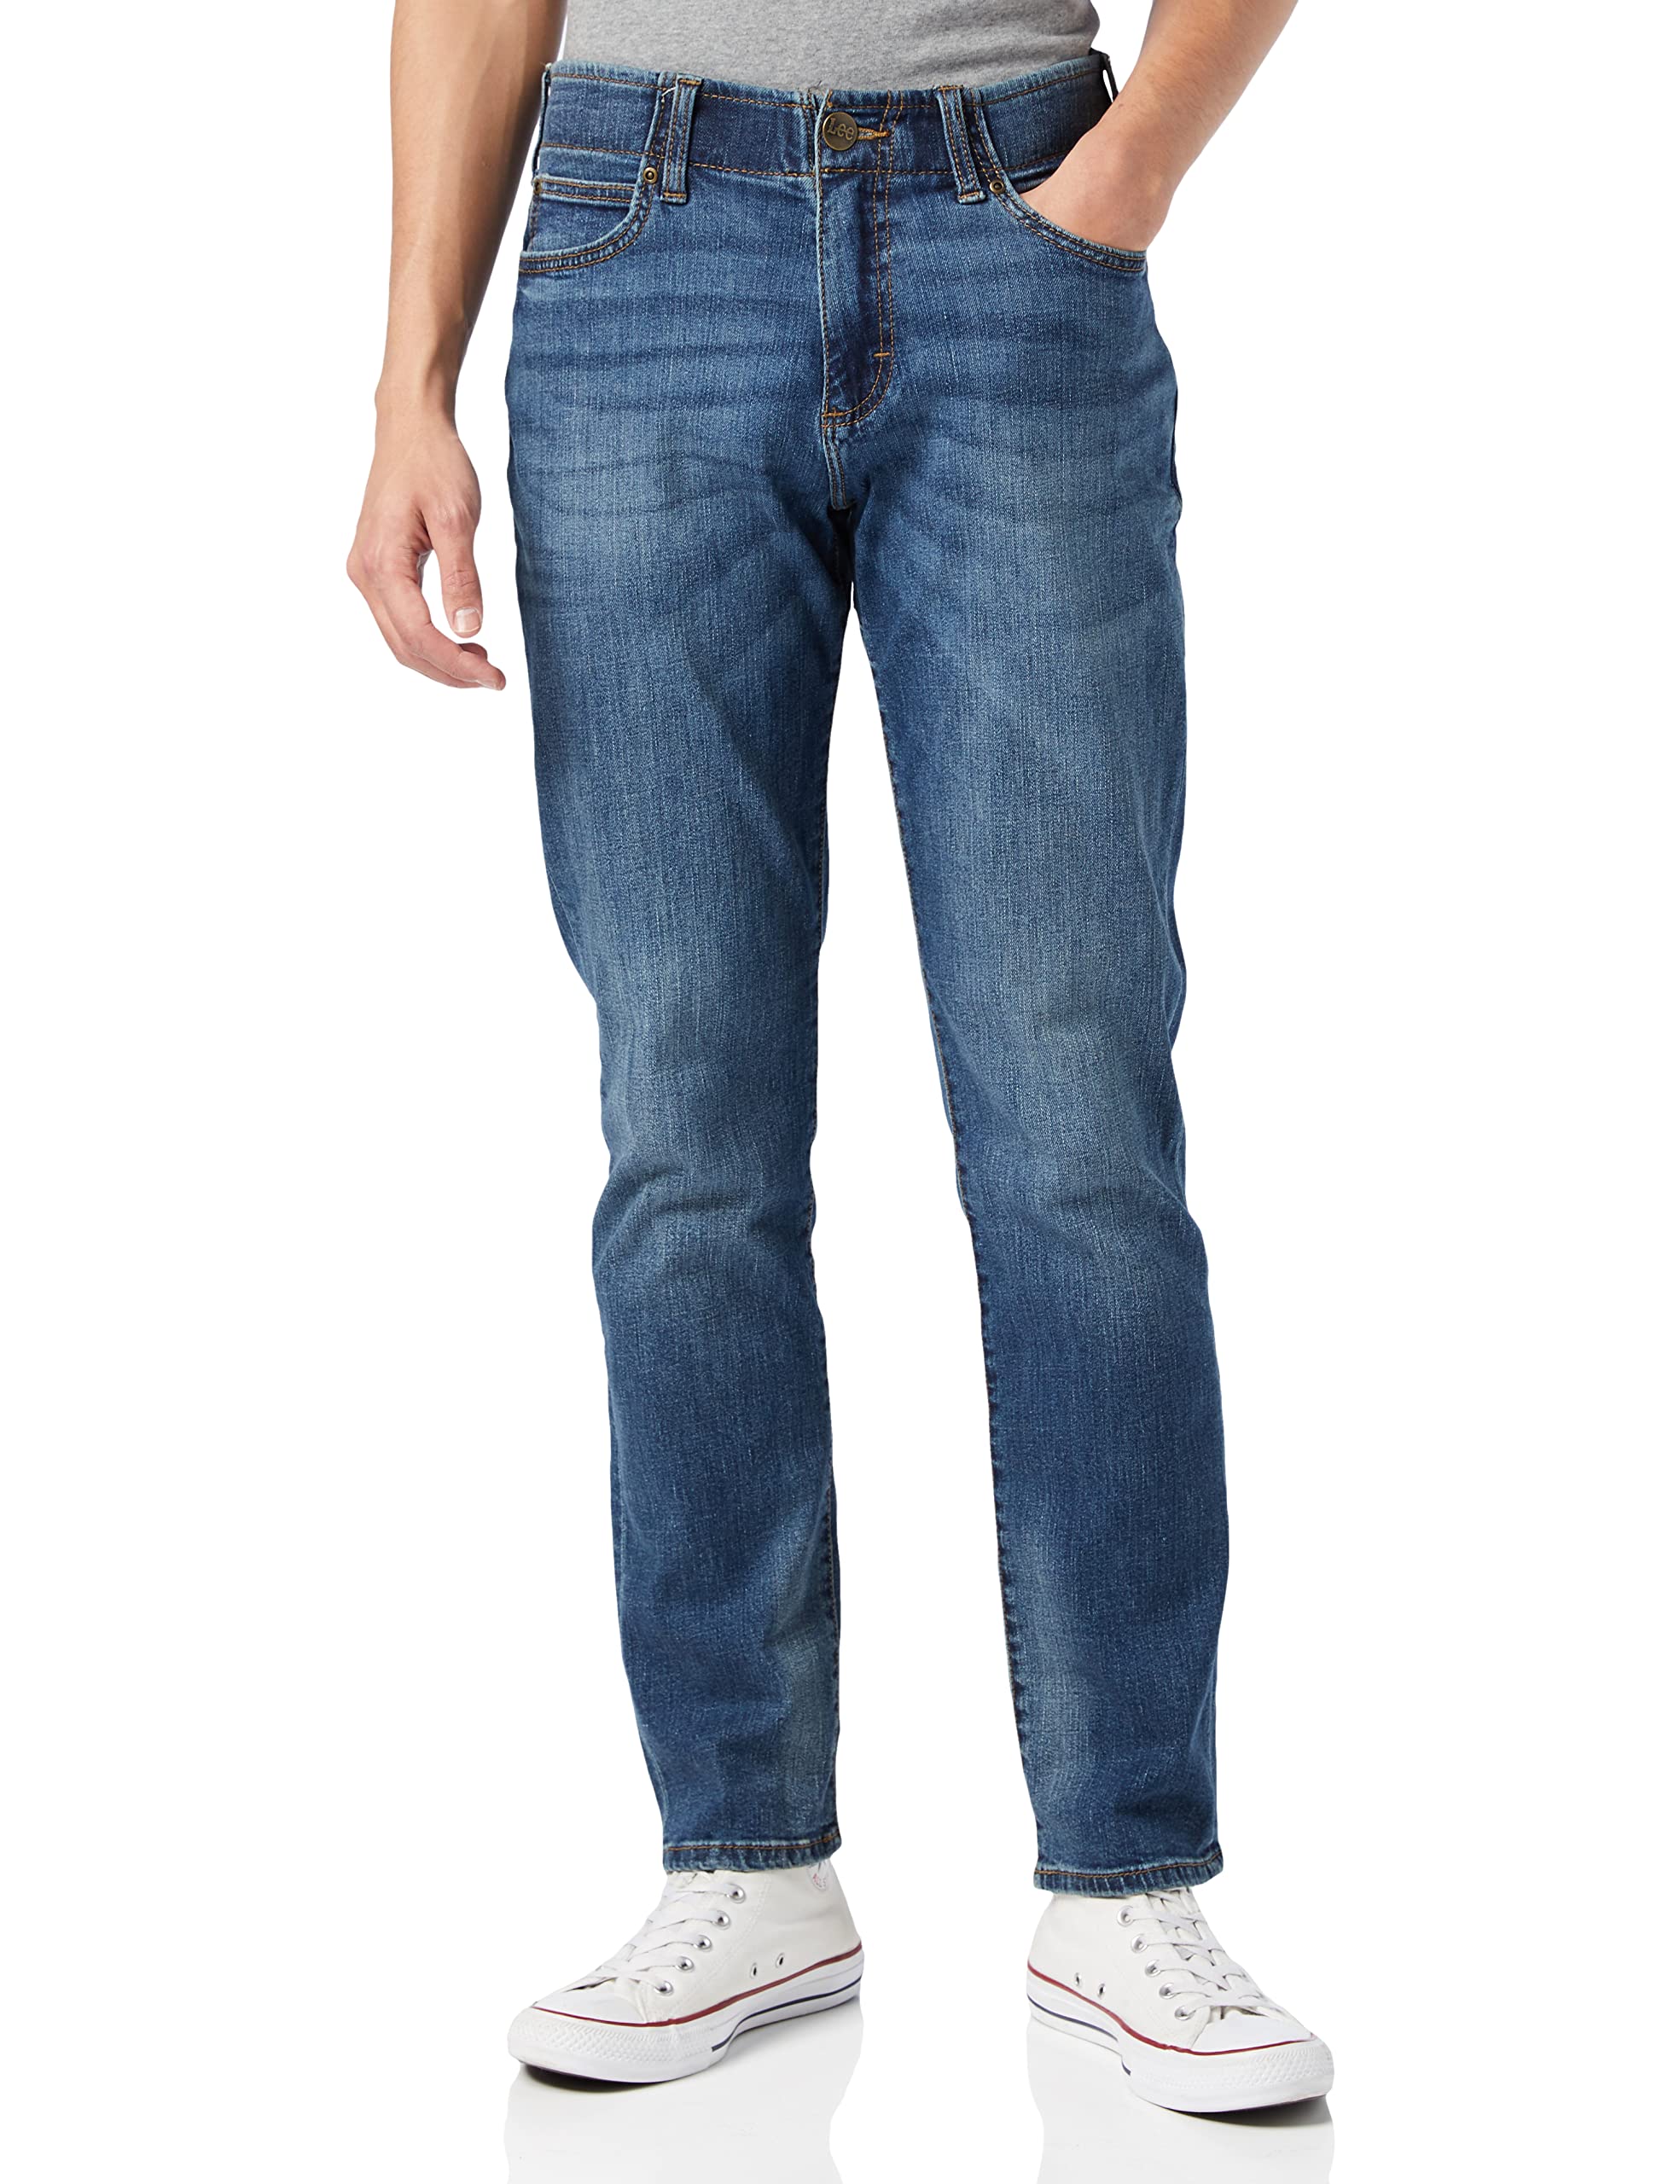 Lee Herren Straight Fit Xm Extreme Motion Jeans, Maddox, 32W / 30L